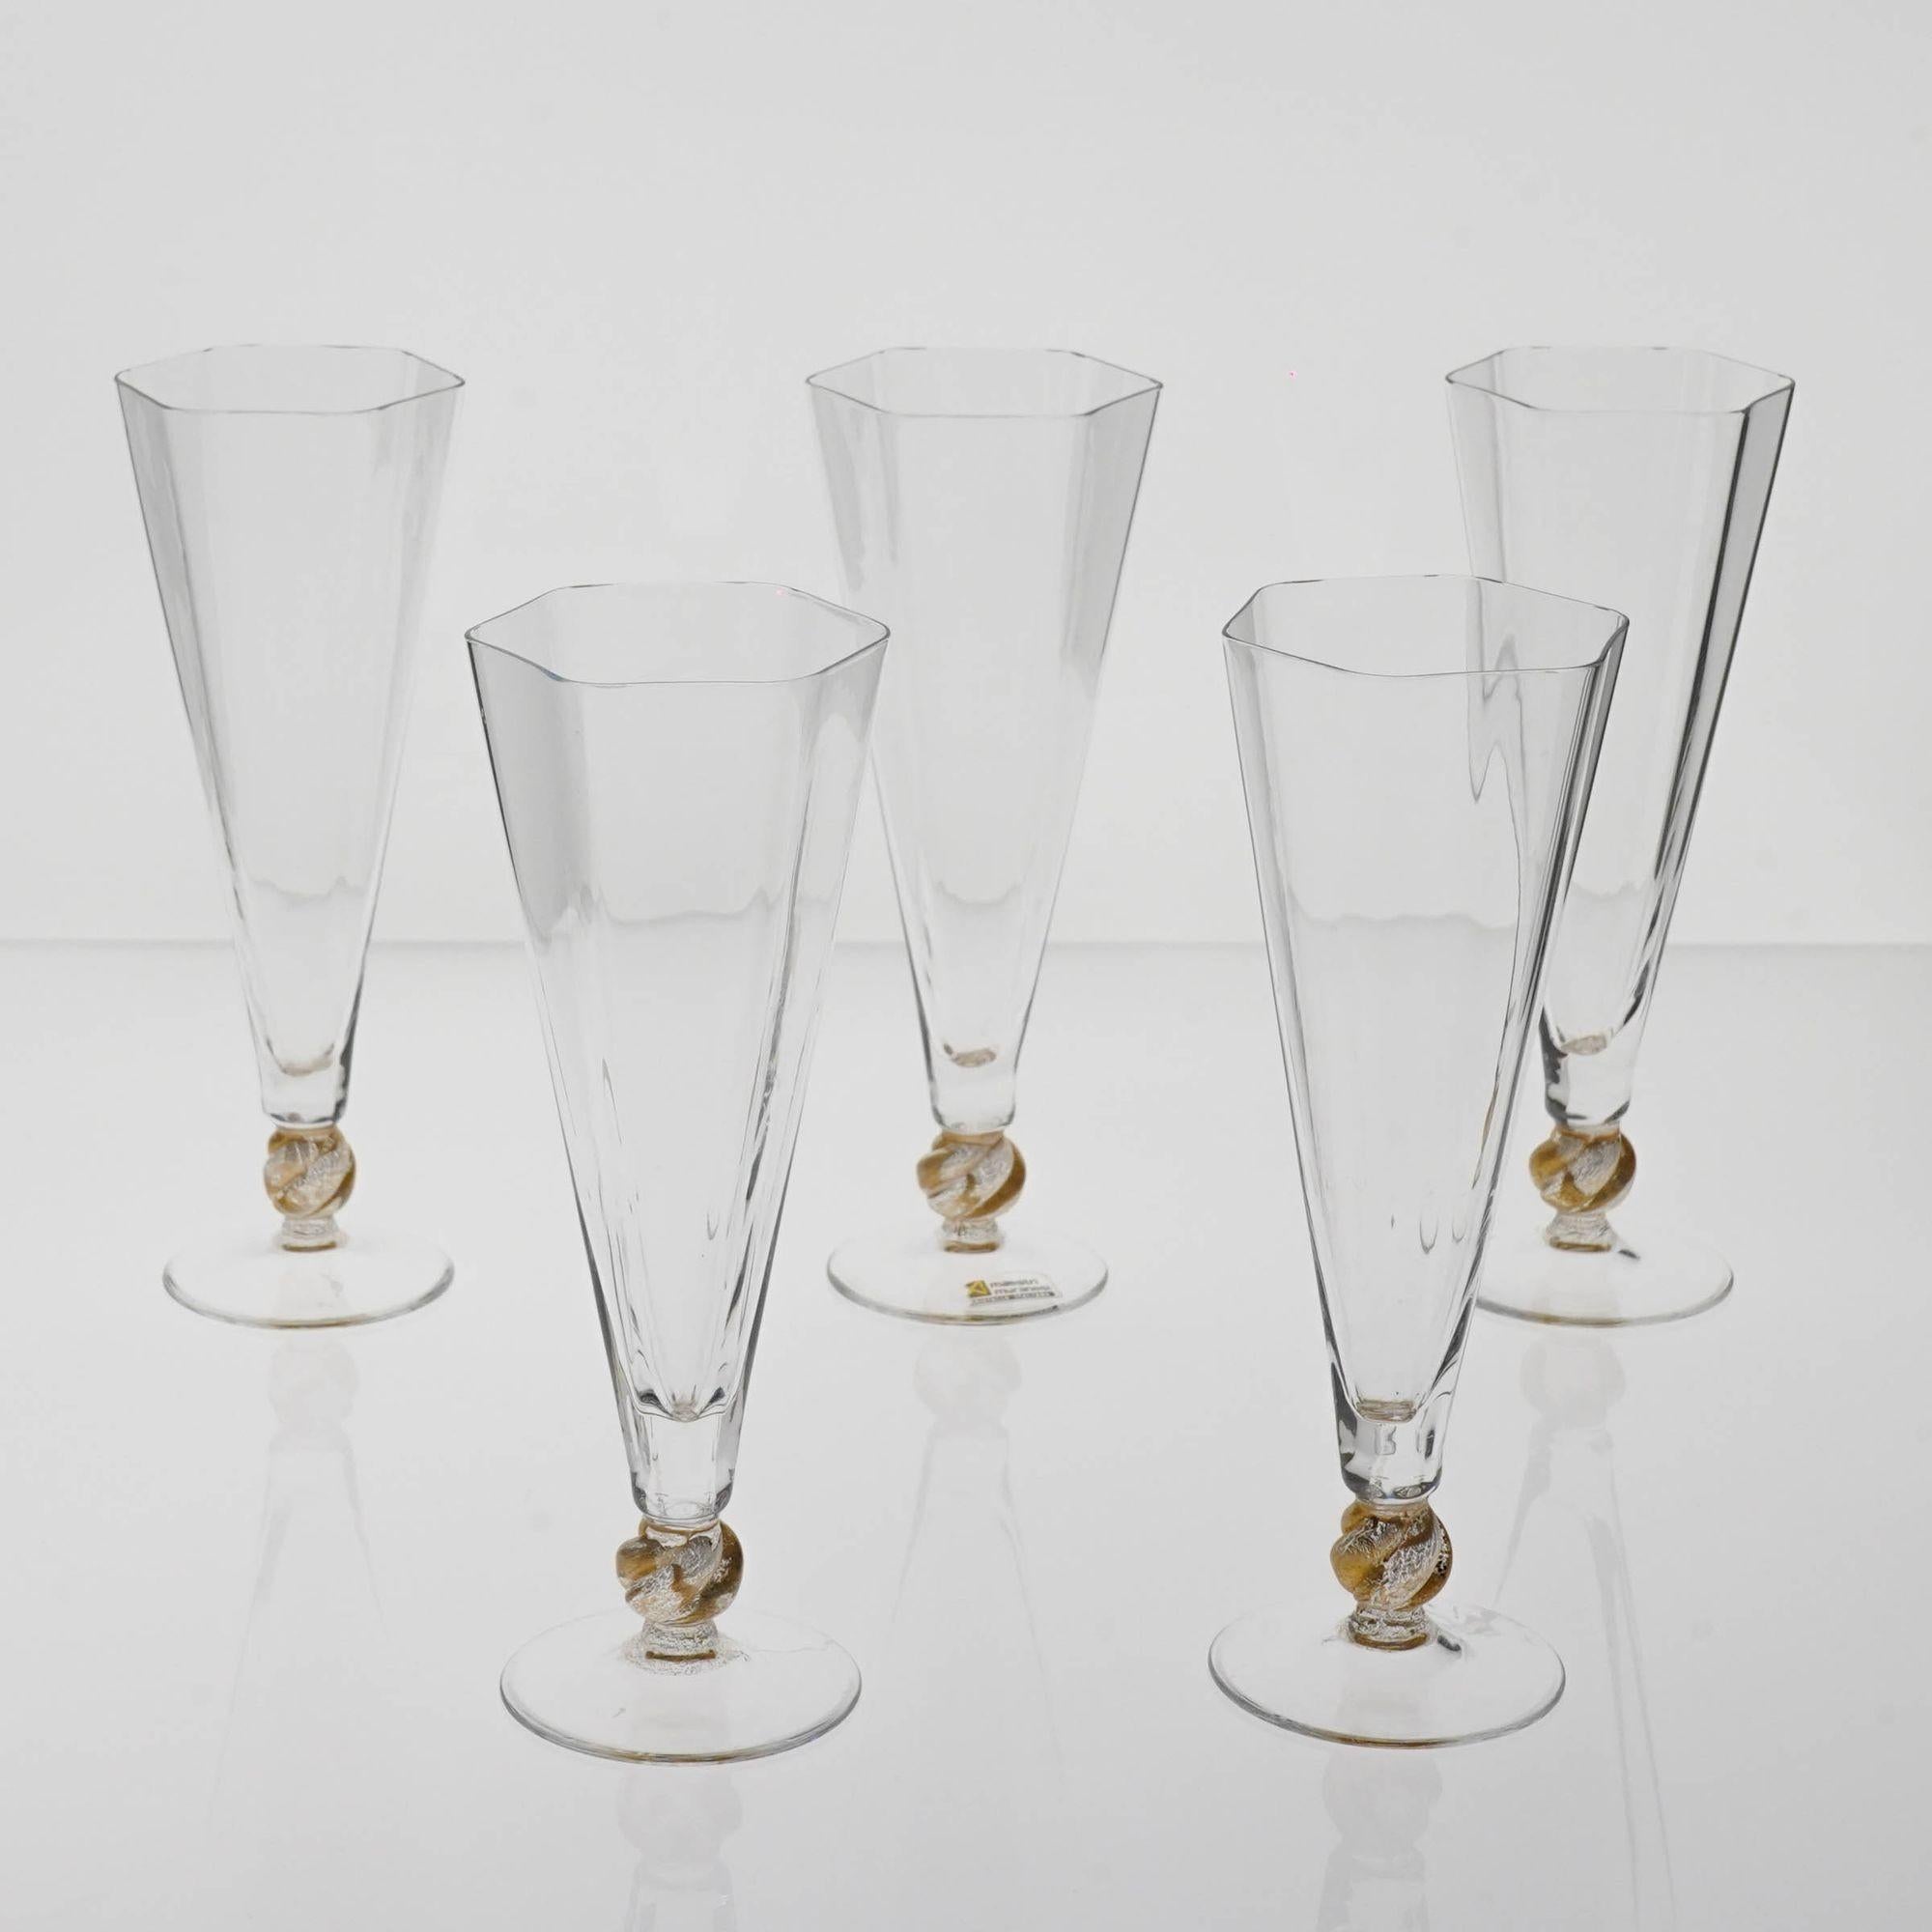 Set of 5 Cenedese Hexagonal Flutes, Gold Accent, Signed, Unique For Sale 12